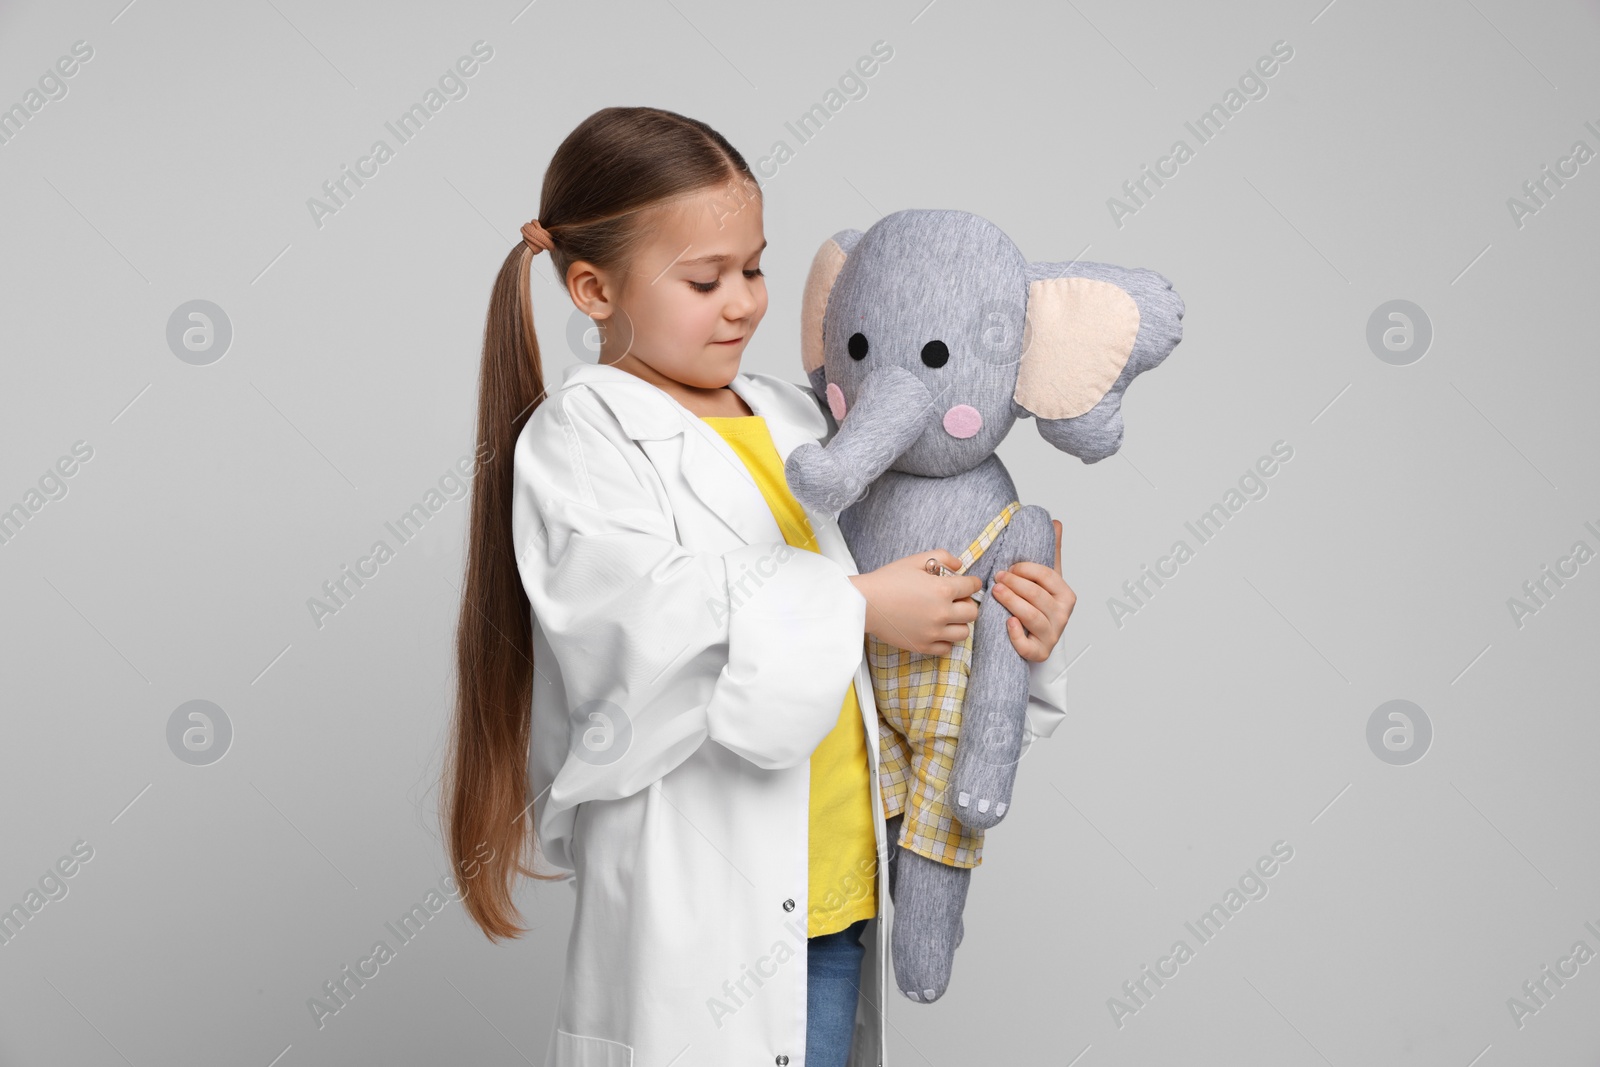 Photo of Little girl playing doctor with toy elephant on light grey background